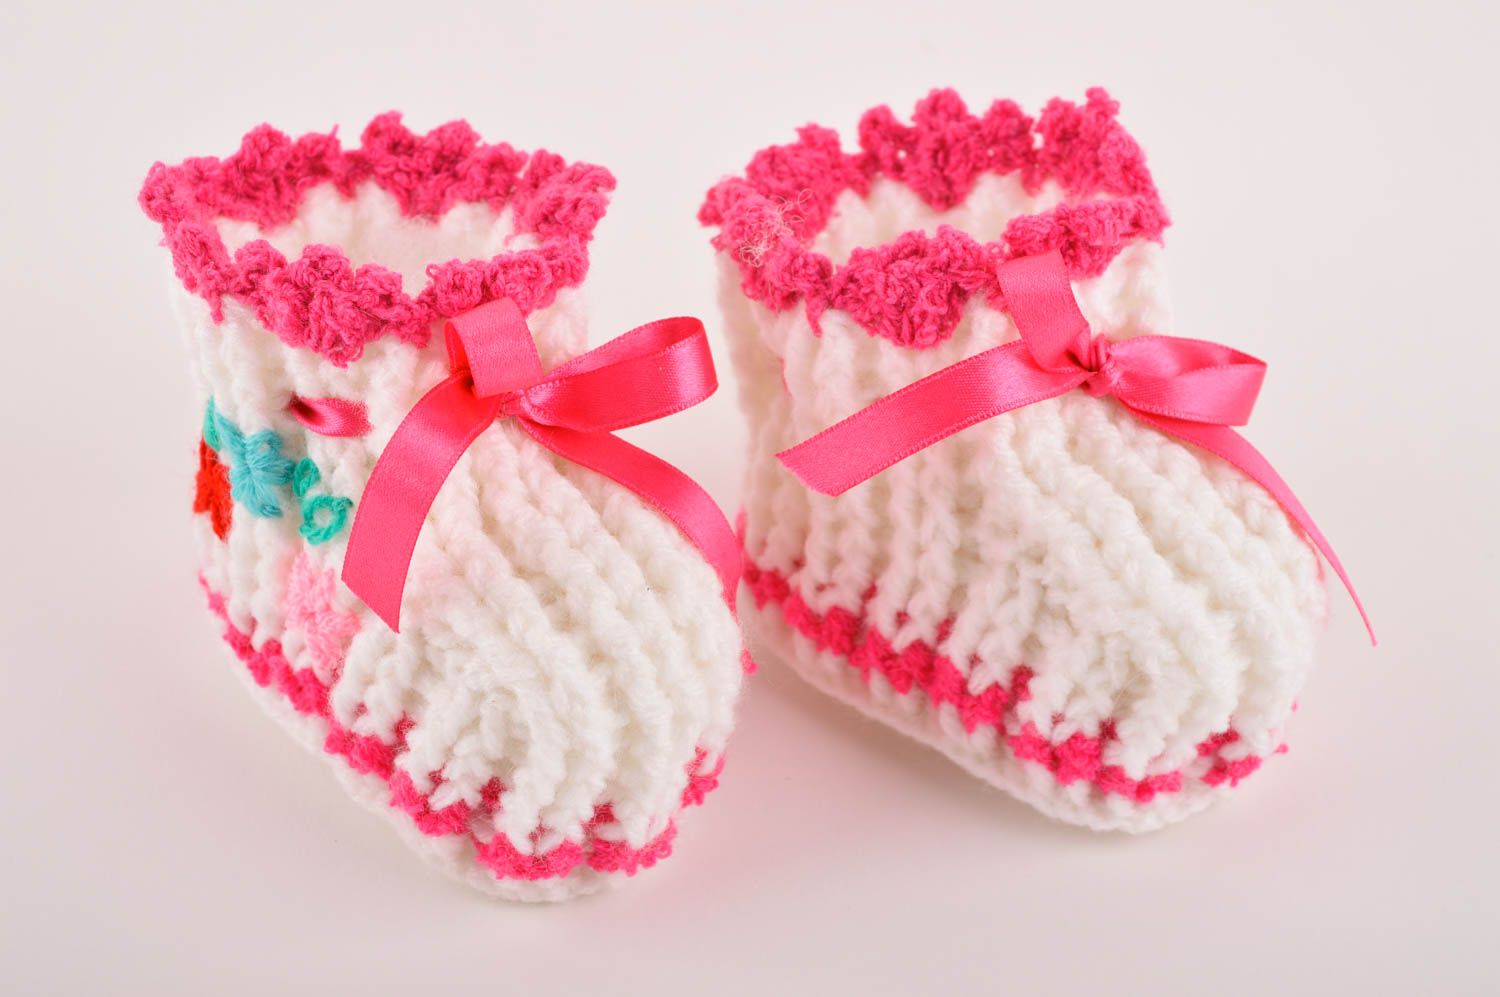 Homemade baby shoes baby booties crochet accessories goods for kids baby socks photo 2